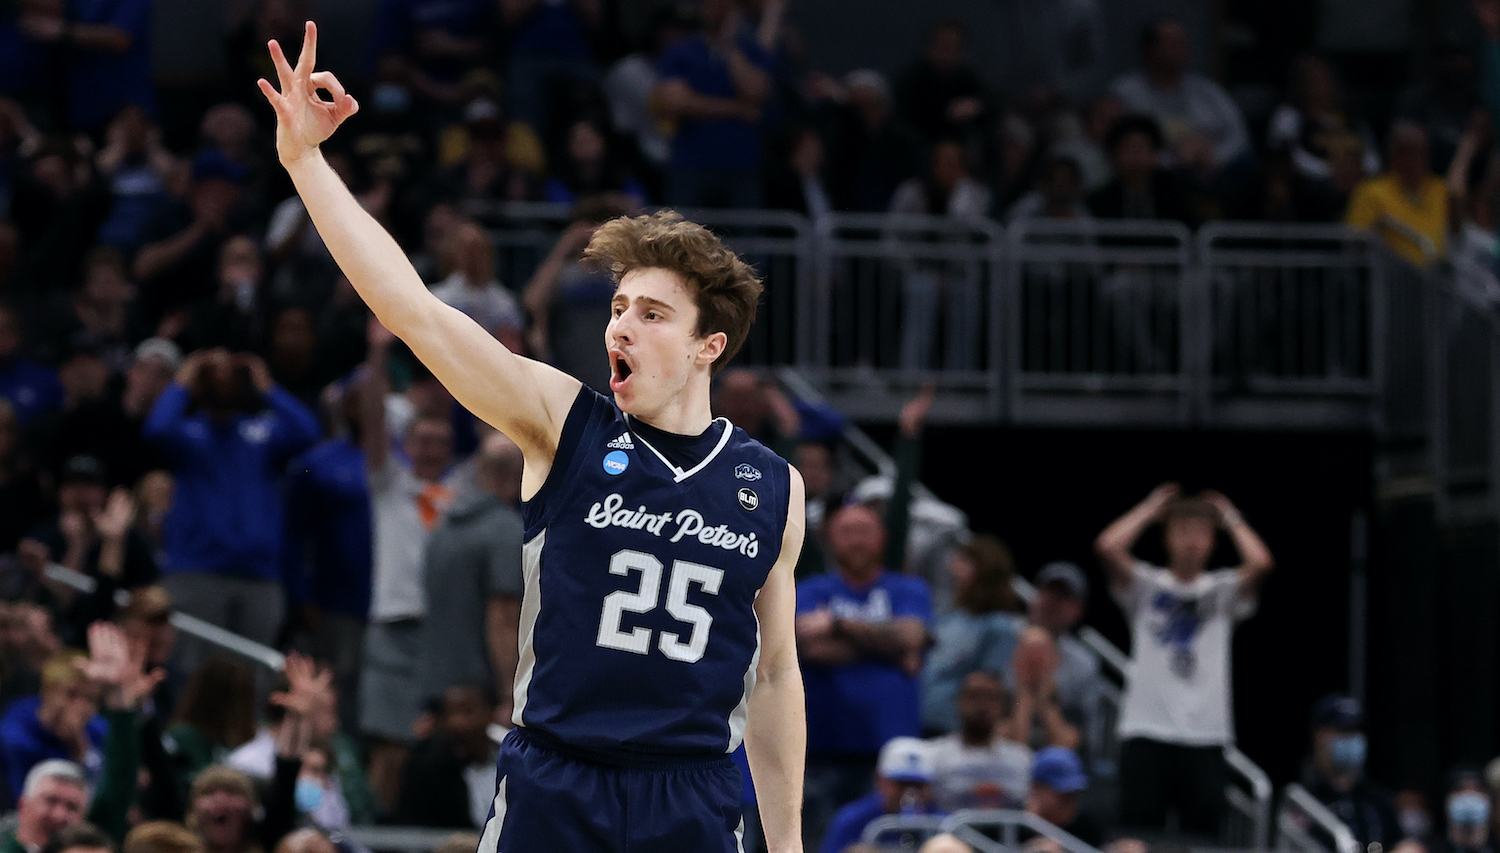 INDIANAPOLIS, INDIANA - MARCH 17: Doug Edert #25 of the Saint Peter's Peacocks celebrates after making a three-point basket against the during the second half in the first round game of the 2022 NCAA Men's Basketball Tournament at Gainbridge Fieldhouse on March 17, 2022 in Indianapolis, Indiana. (Photo by Dylan Buell/Getty Images)